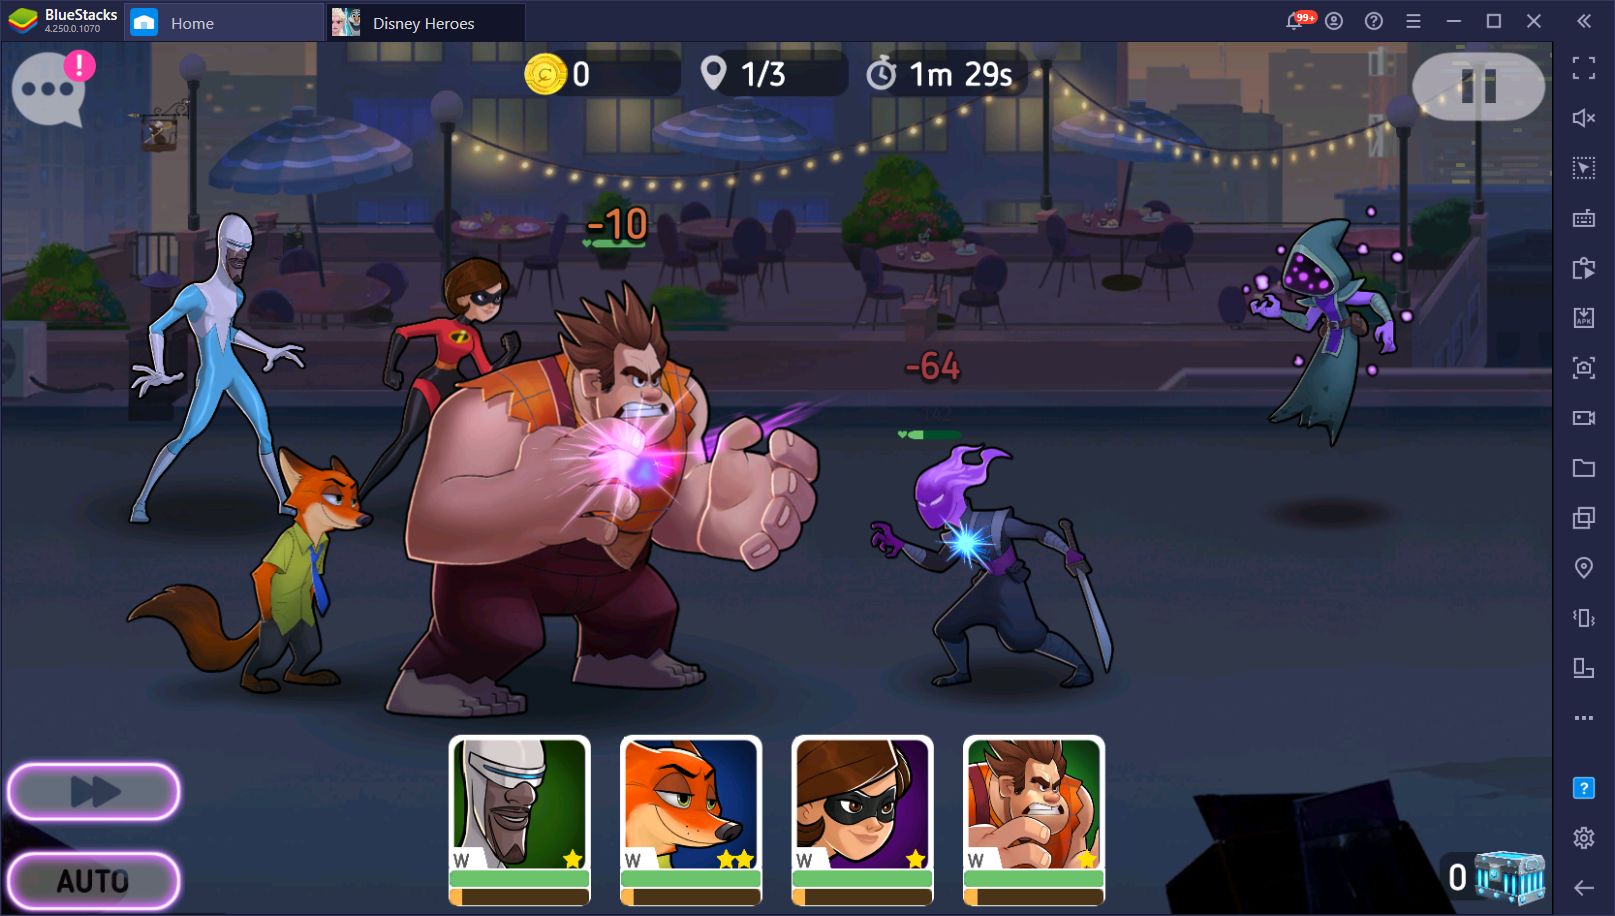 Gaming on the Mobile Cloud - The Benefits of Playing Disney Heroes on